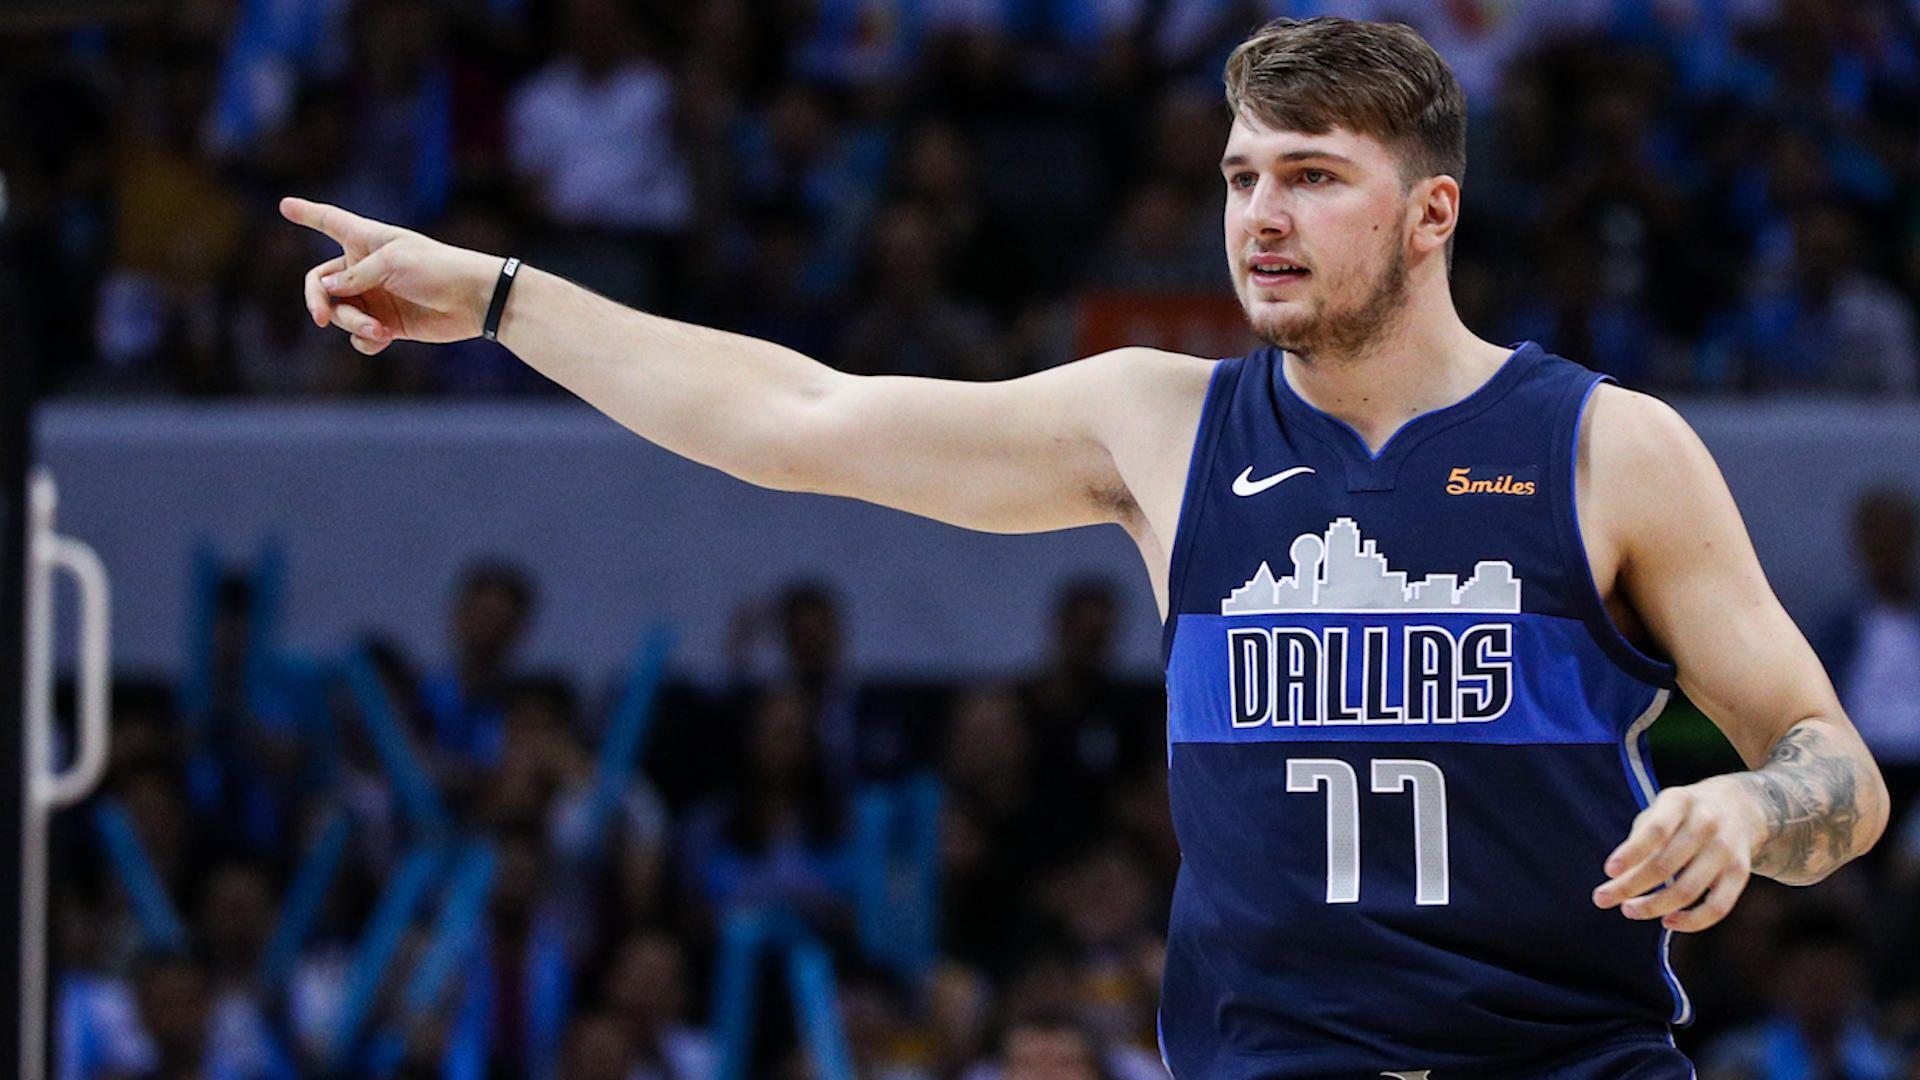 Forget the Turnovers - The Mavs Struck Gold With Doncic